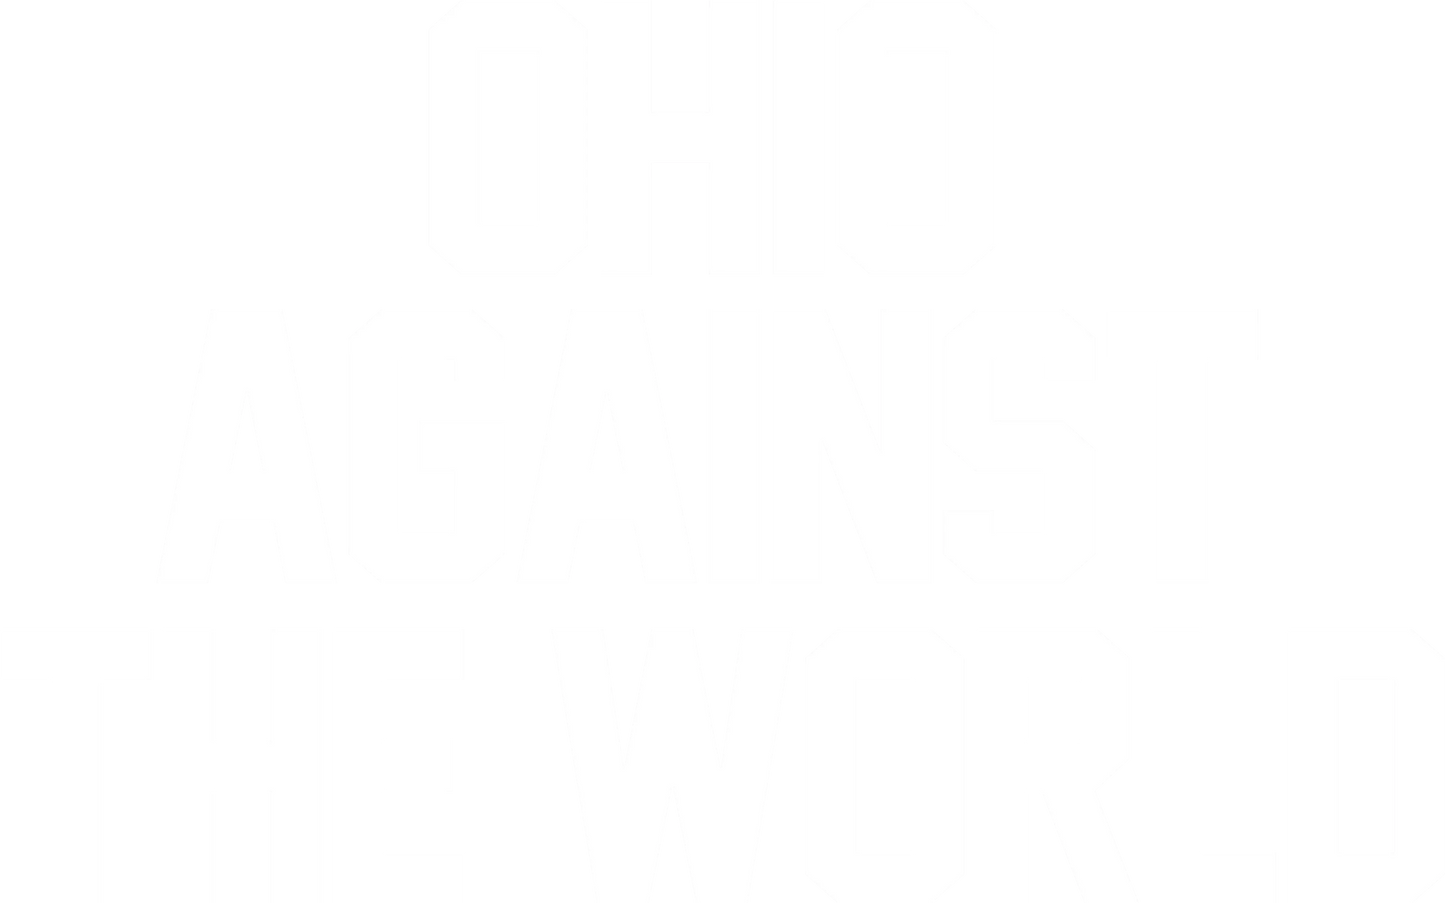 OSU13 - Ohio Against the World, DTF Transfer, Apparel & Accessories, Ace DTF